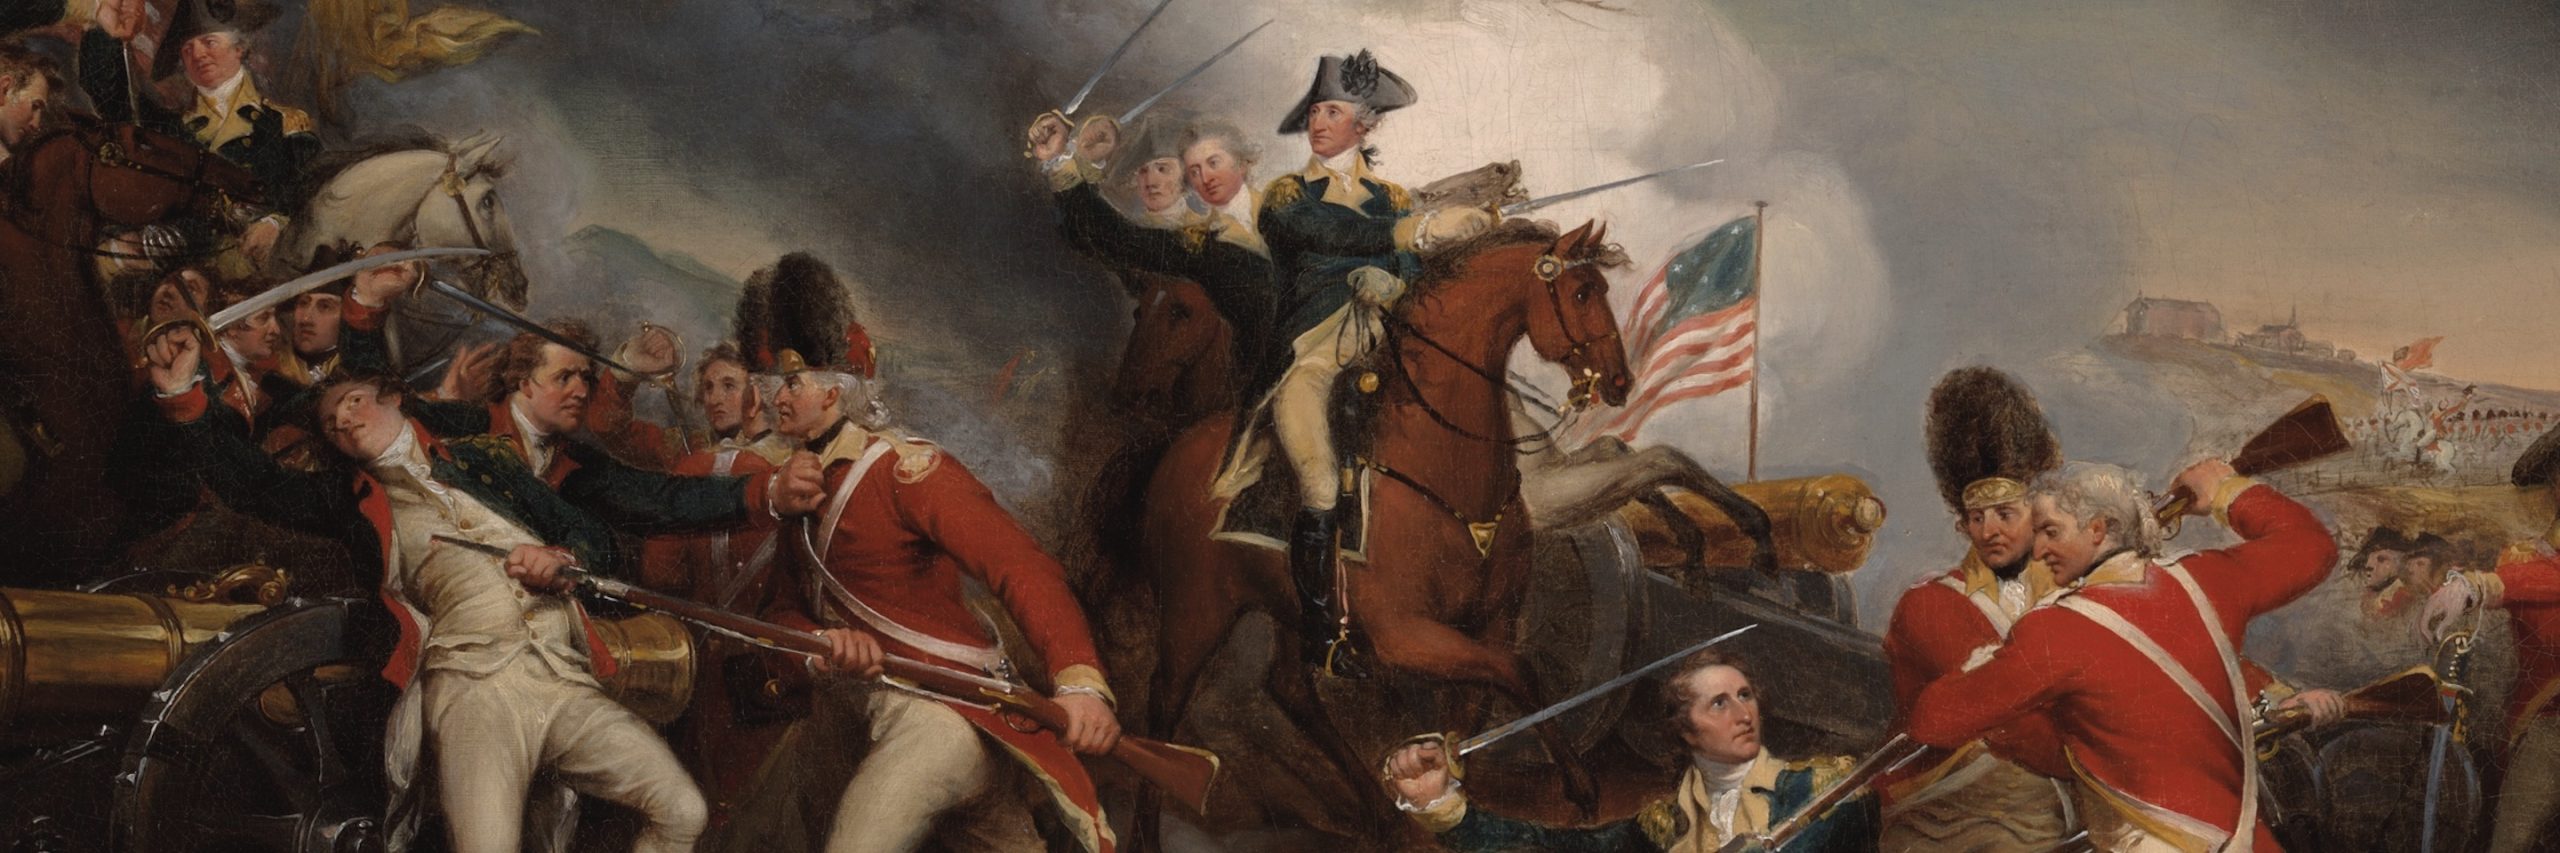 Imagining the Battle of Princeton - The American Revolution Institute